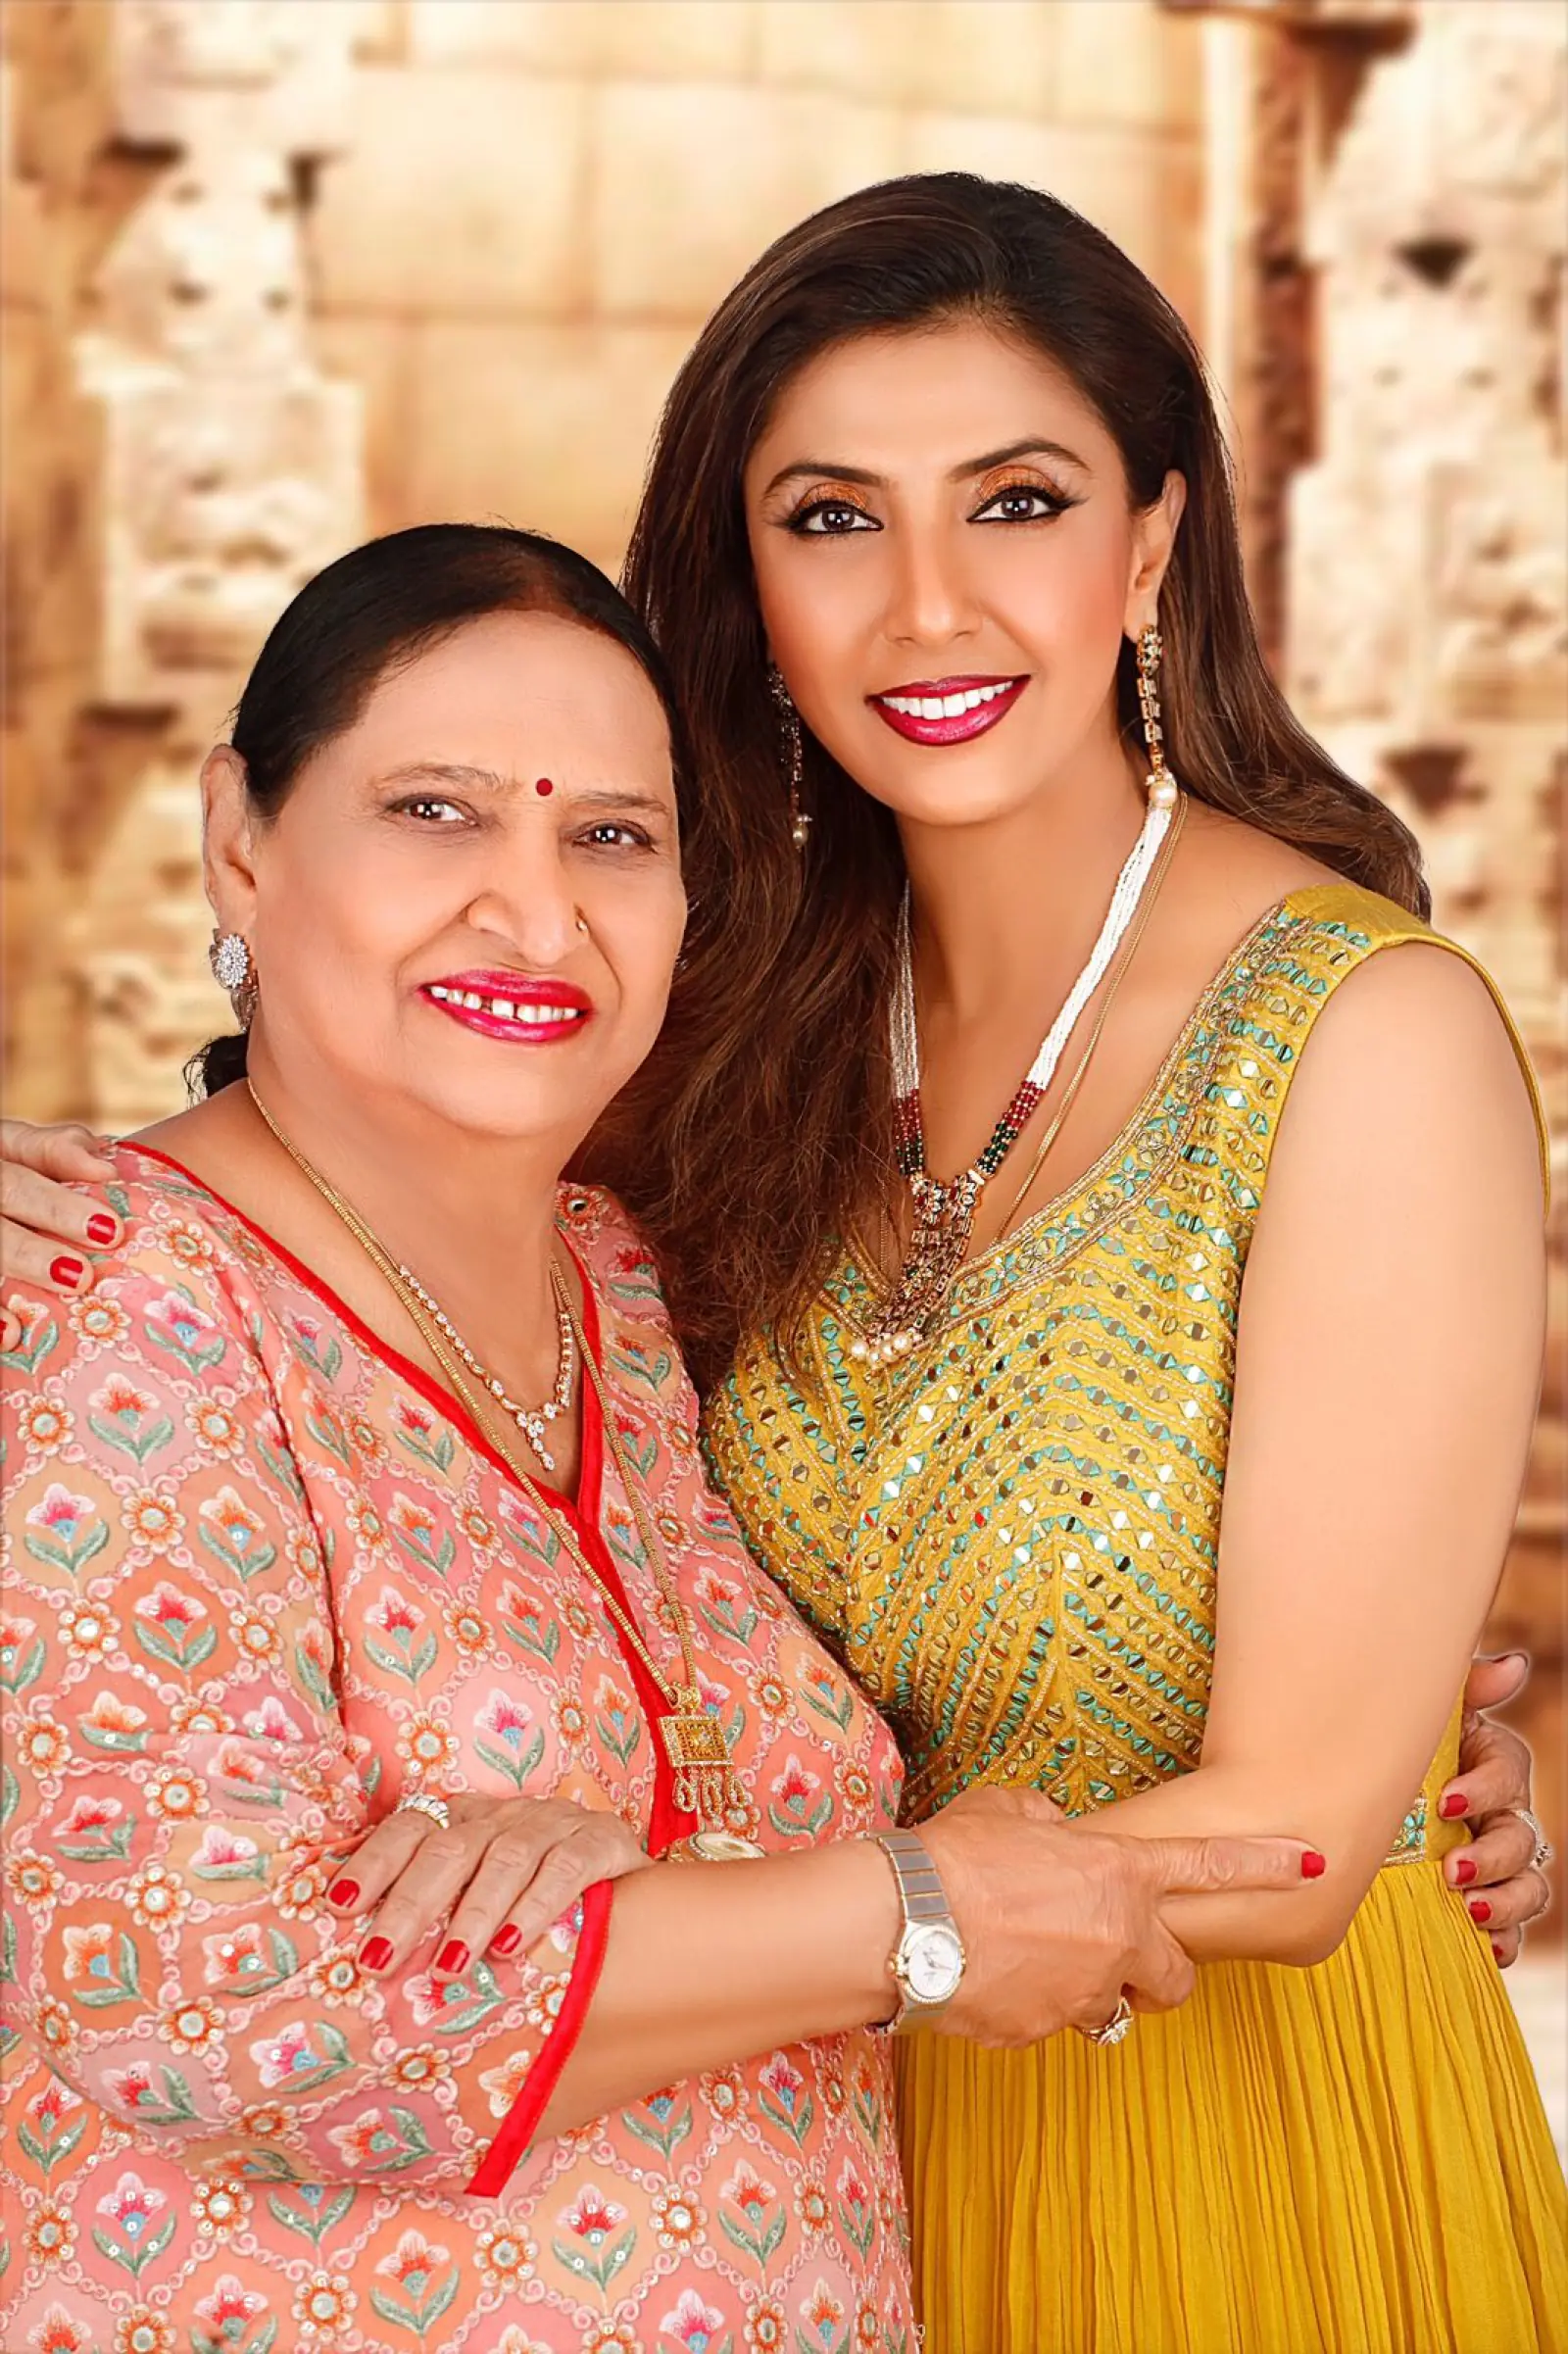 Actress Jyoti Saxena Reflects on Her Mother's Love and Sacrifice on Mother's Day